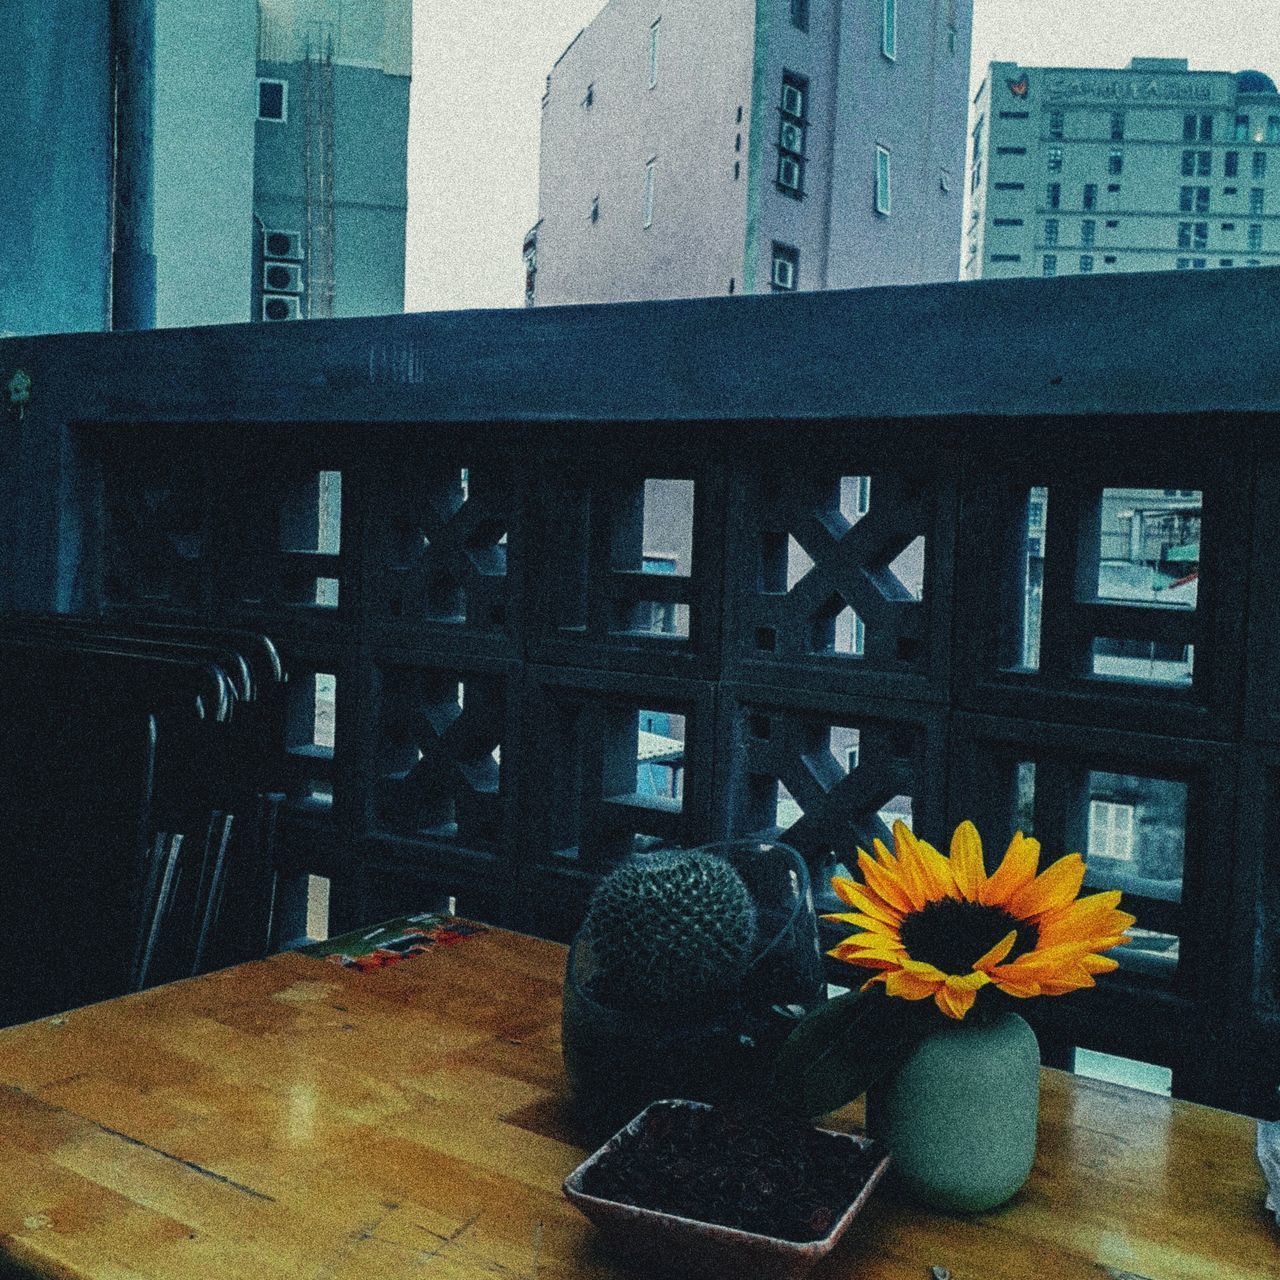 YELLOW FLOWERS ON TABLE BY BUILDINGS